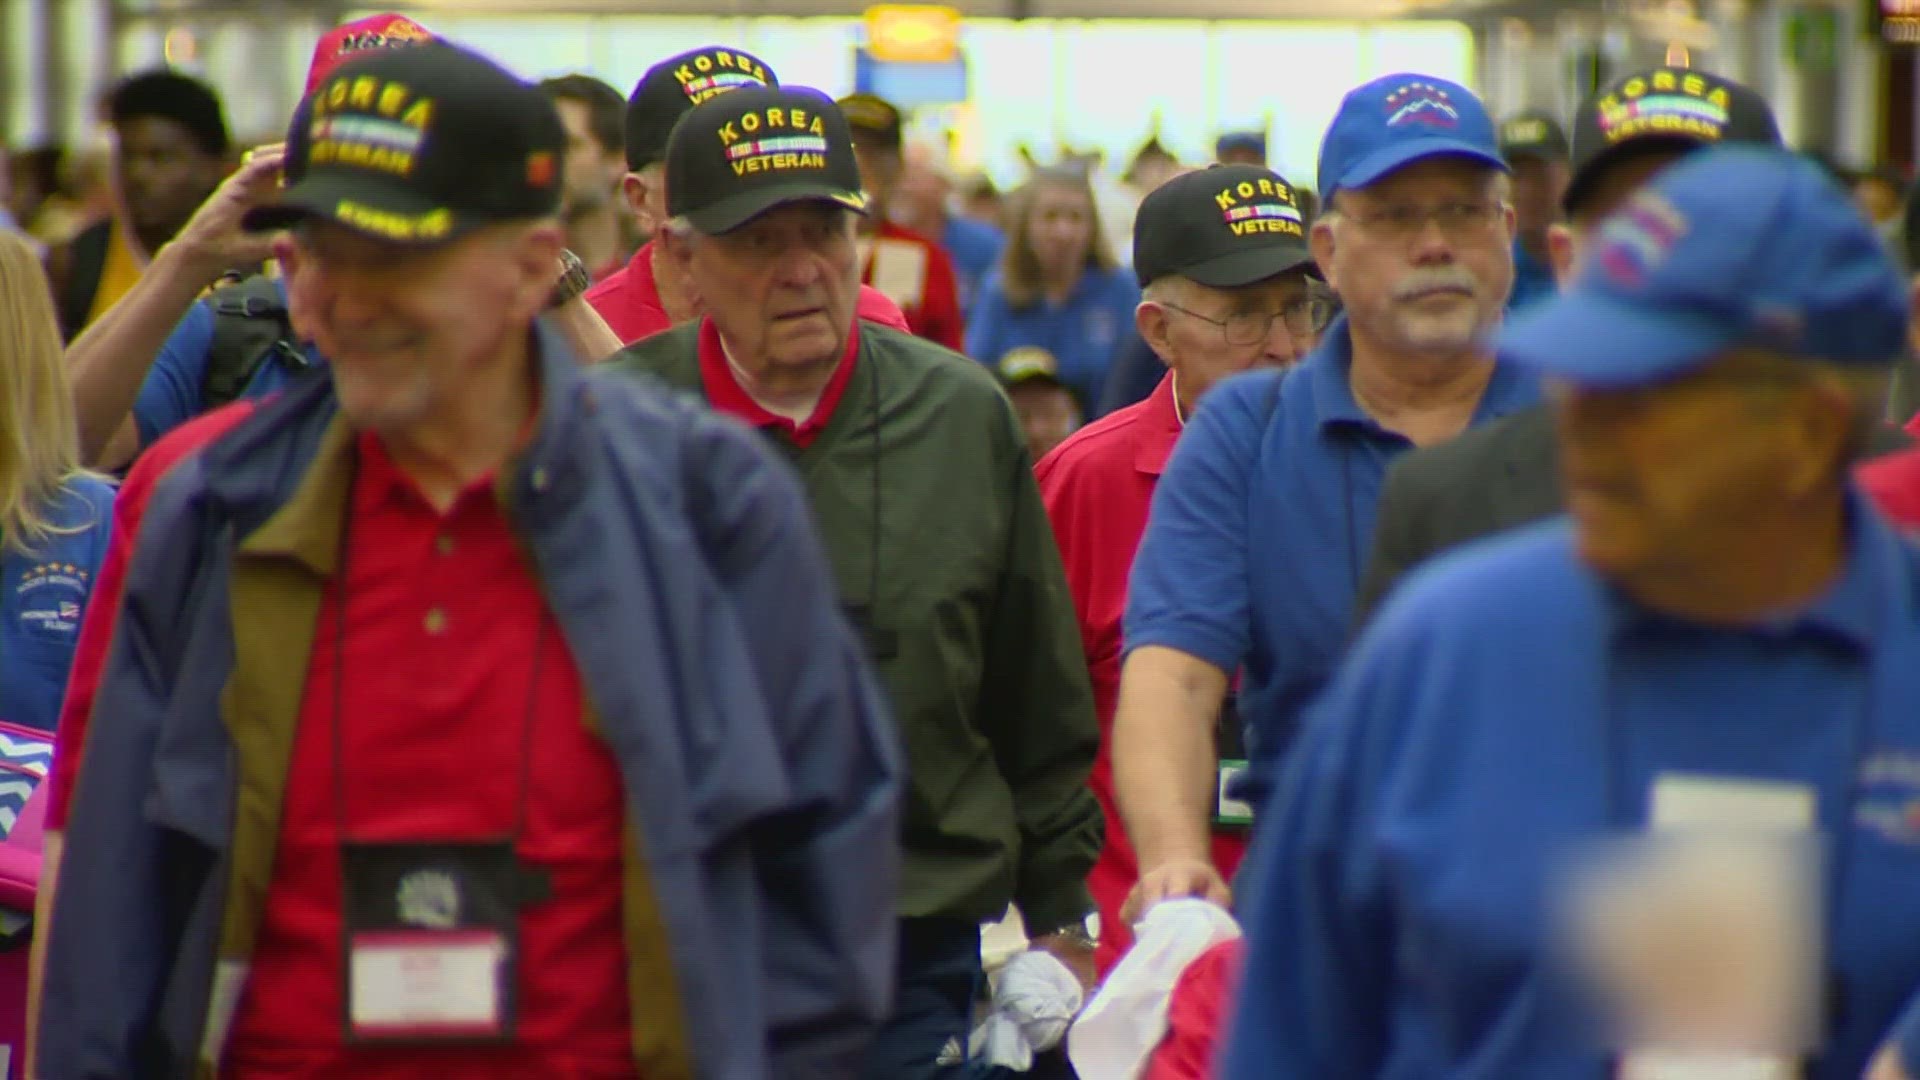 The telethon runs from 5 a.m. to 7 p.m. Thursday, April 4. Call 303-577-2080 to raise funds to send Colorado veterans on the trip of a lifetime.